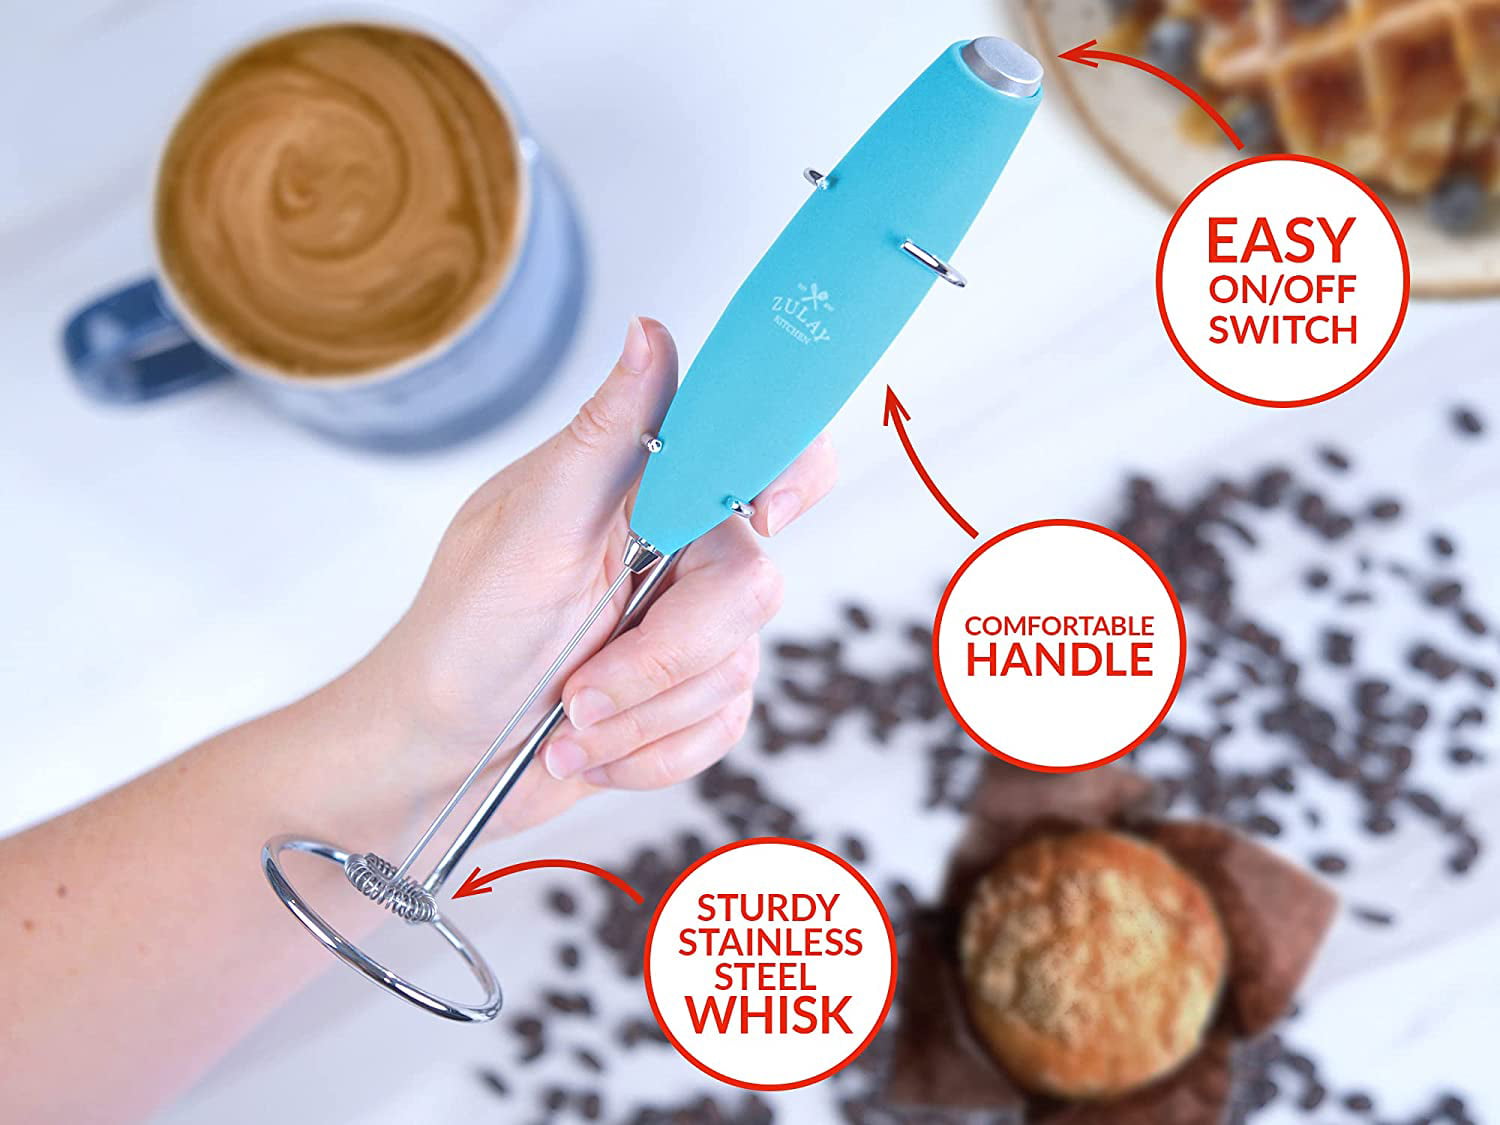 Zulay Original Milk Frother Handheld Foam Maker for Lattes - Whisk